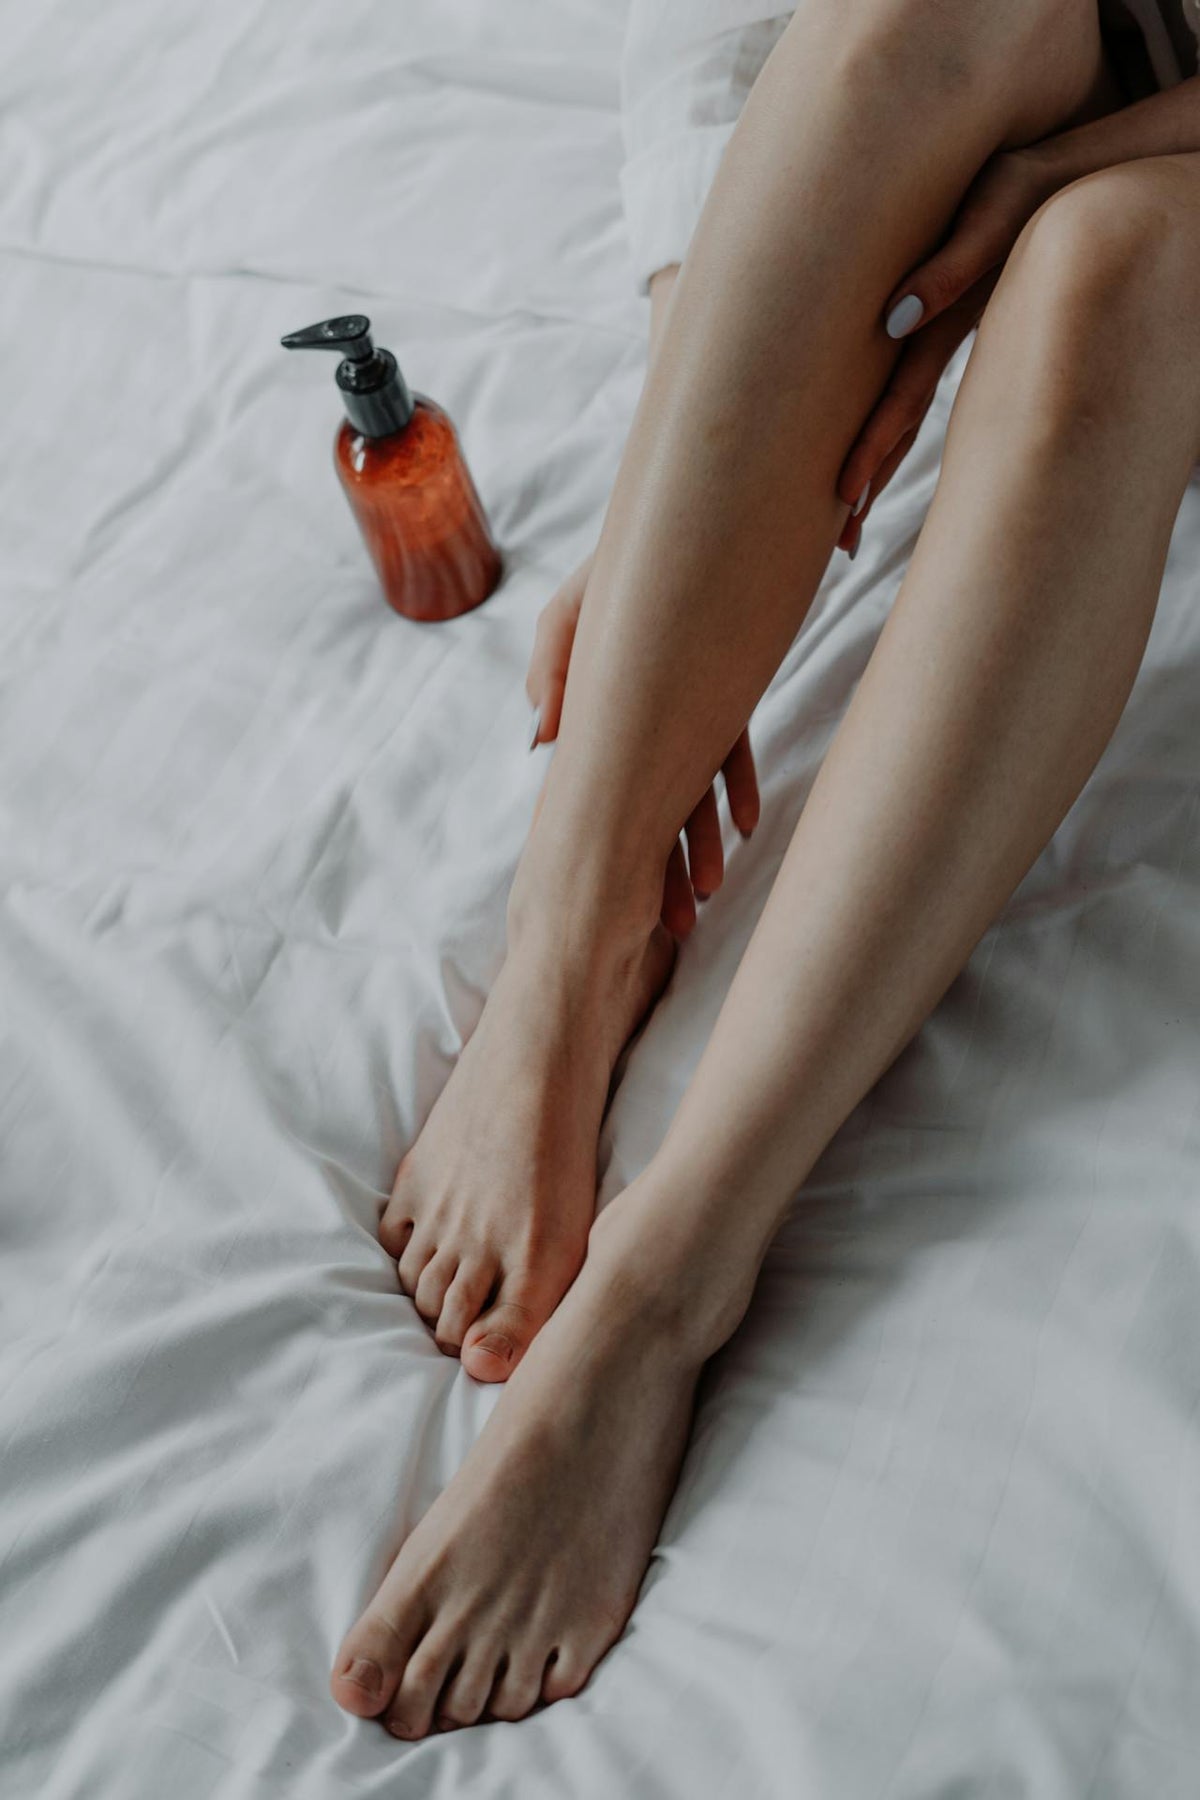 Voltaren Gel for Foot Pain: What You Need To Know